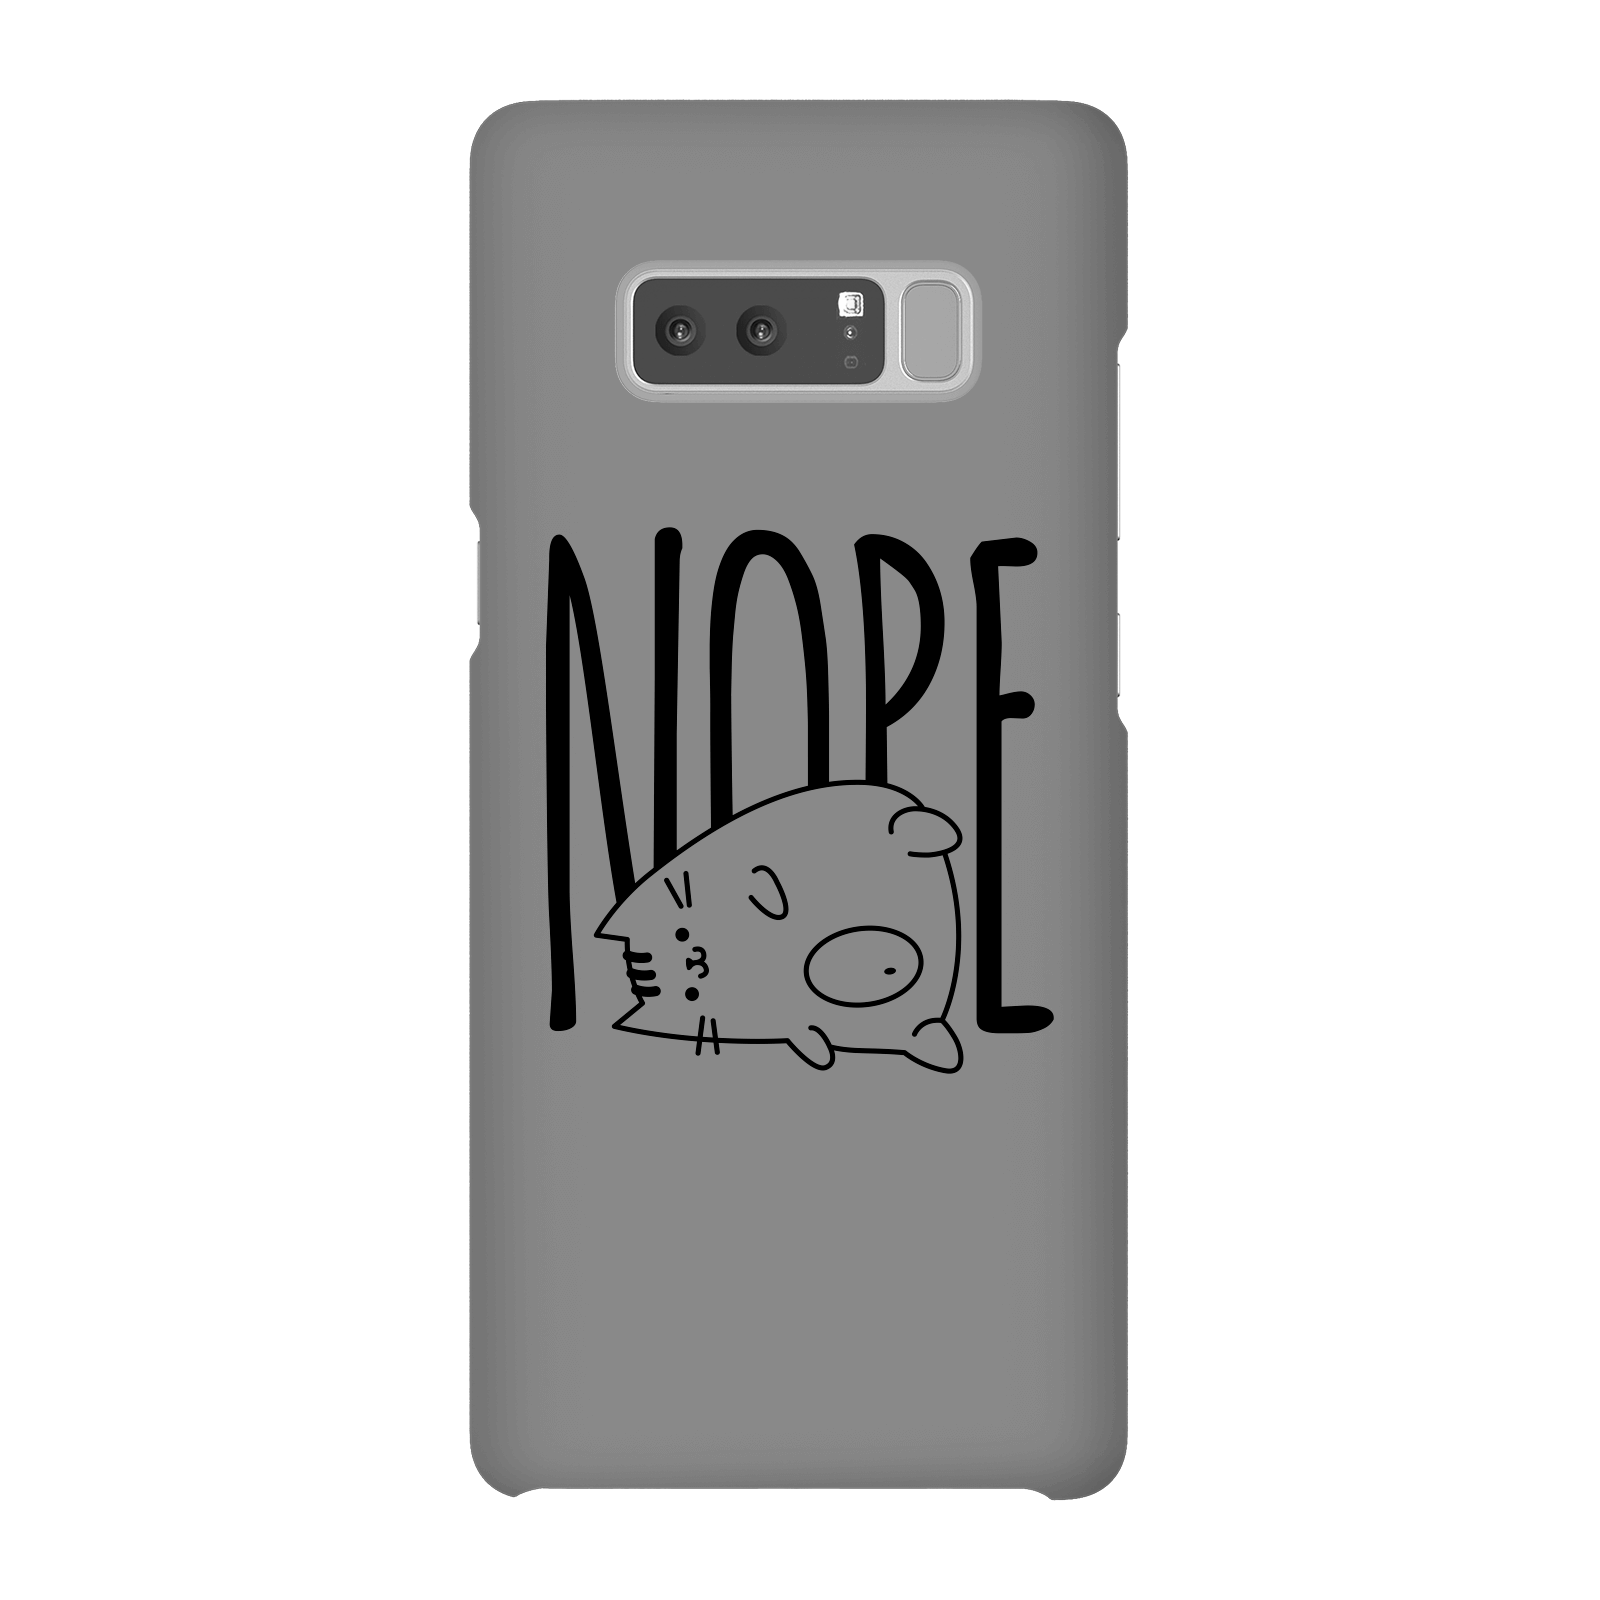 Nope Phone Case for iPhone and Android - Samsung Note 8 - Snap Case - Gloss